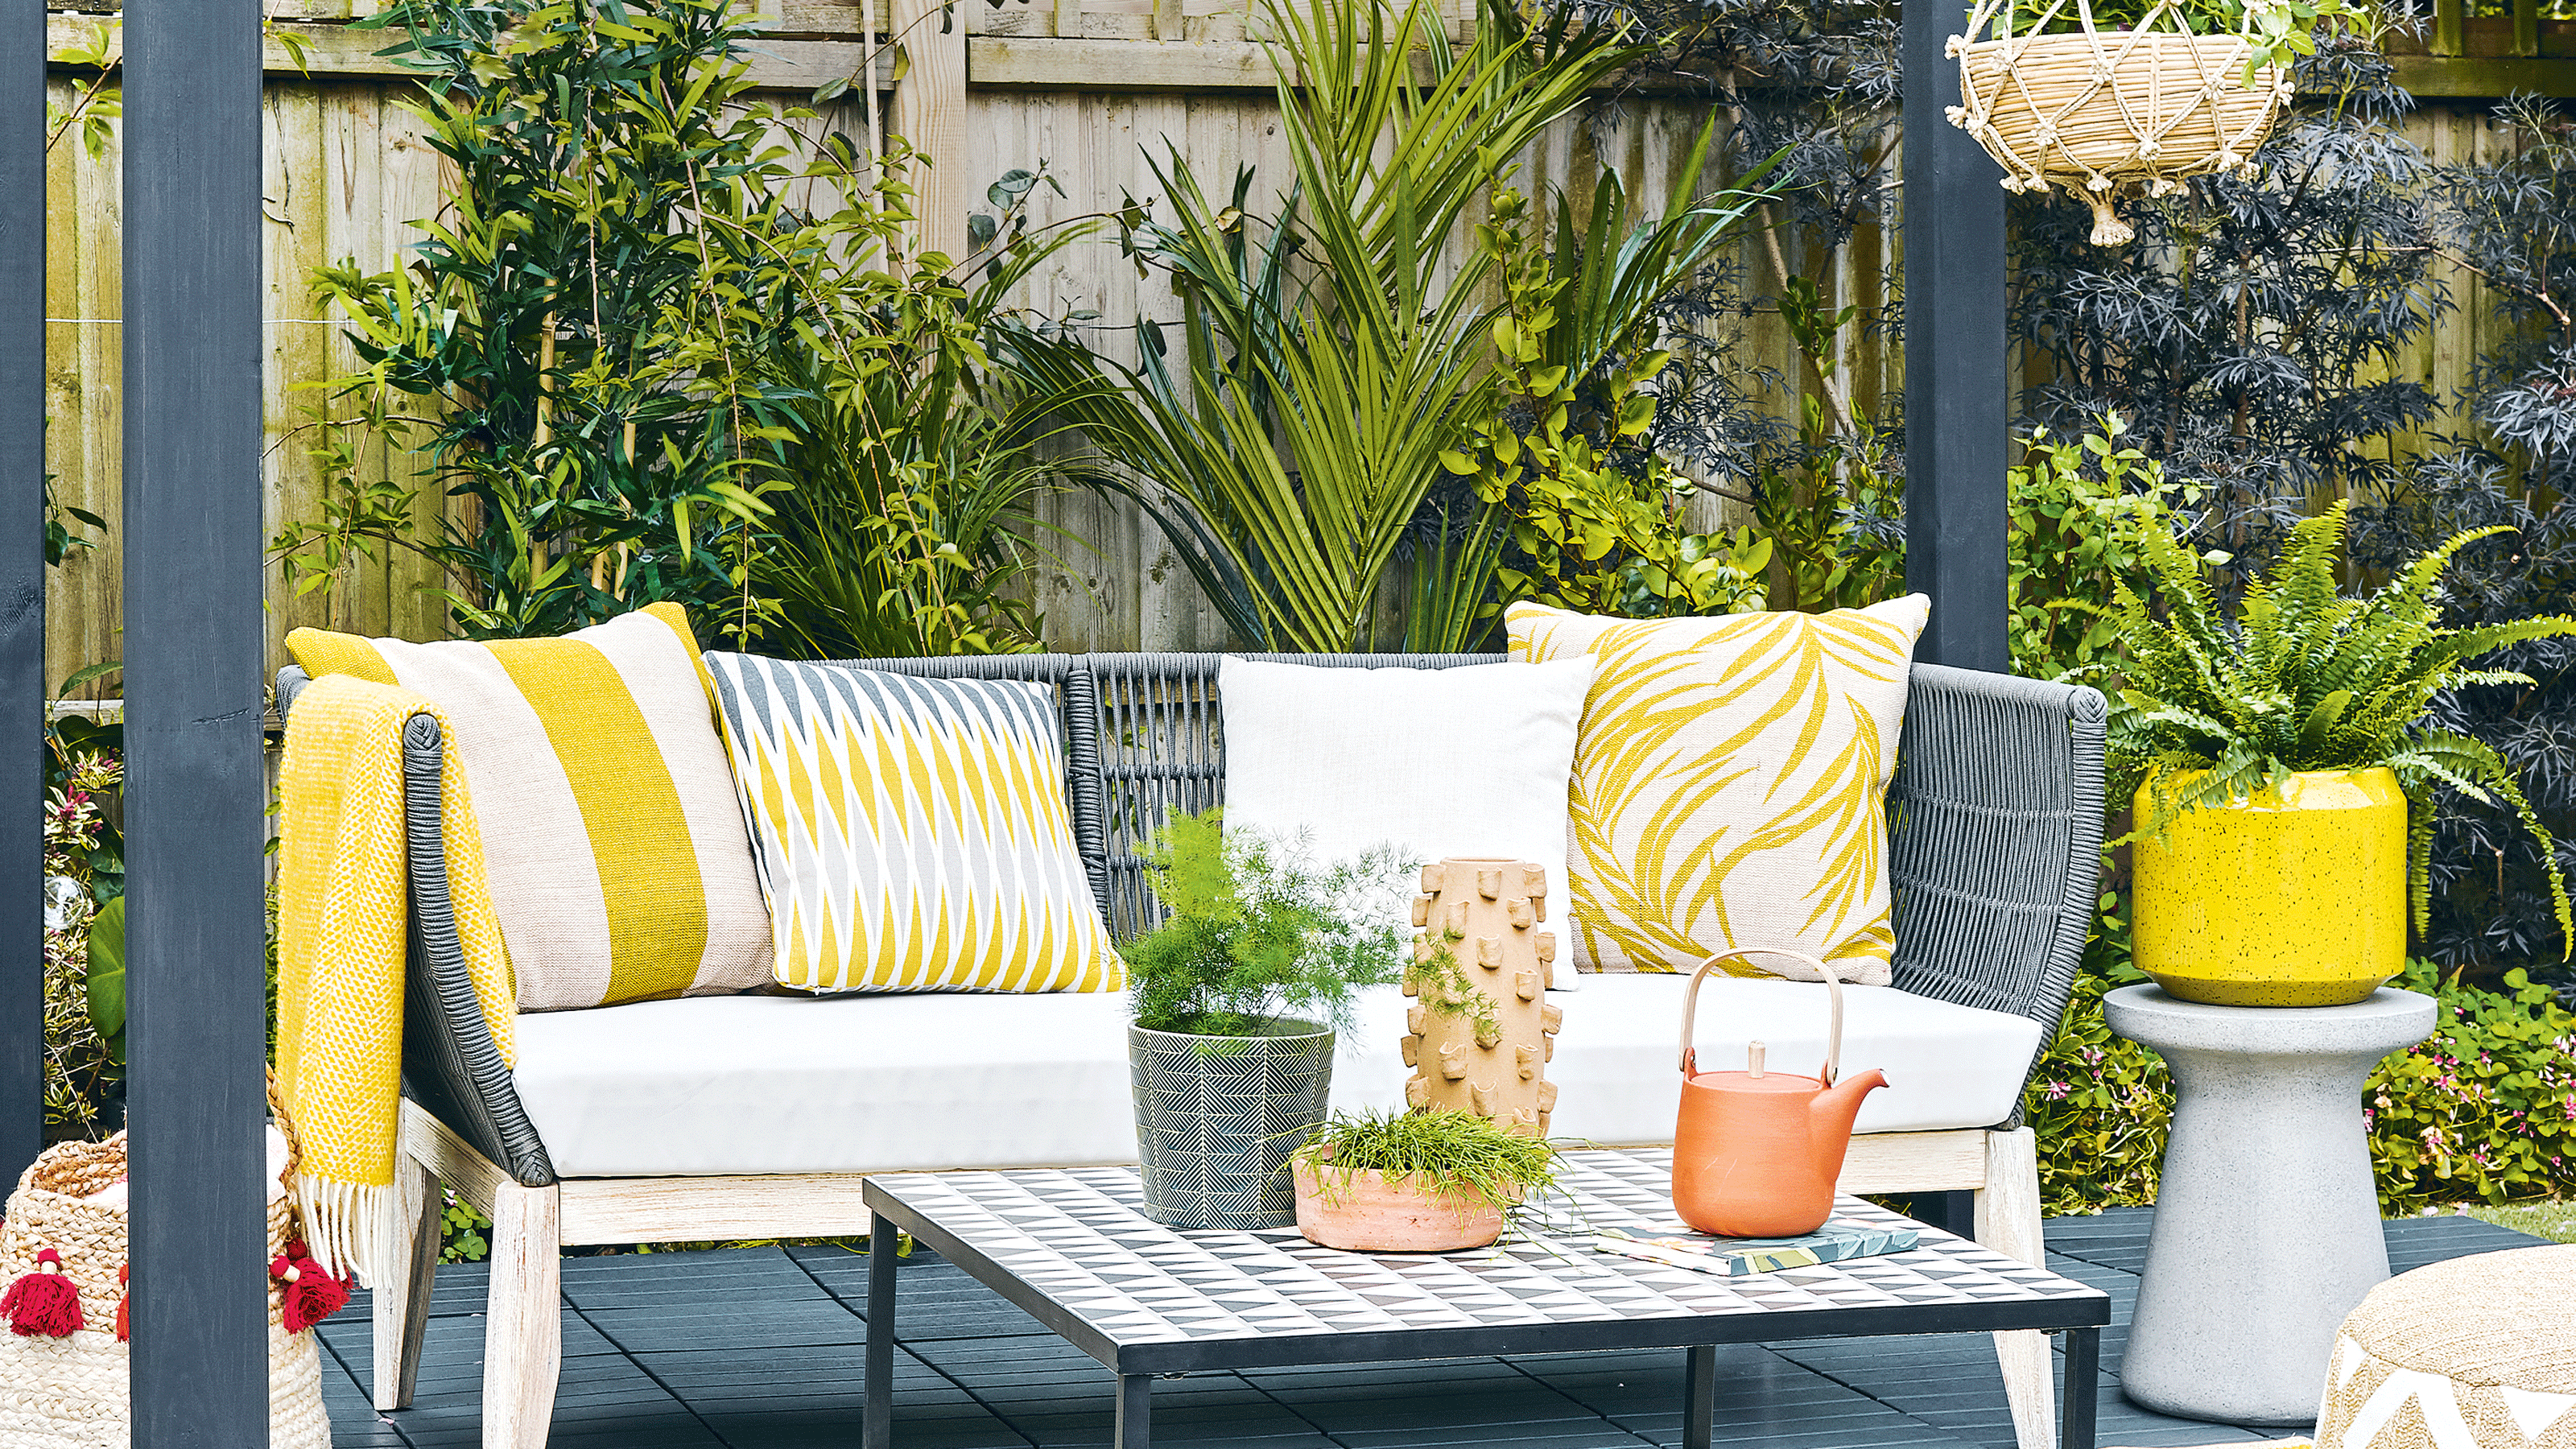 Wooden outdoor sofa with outdoor cushions